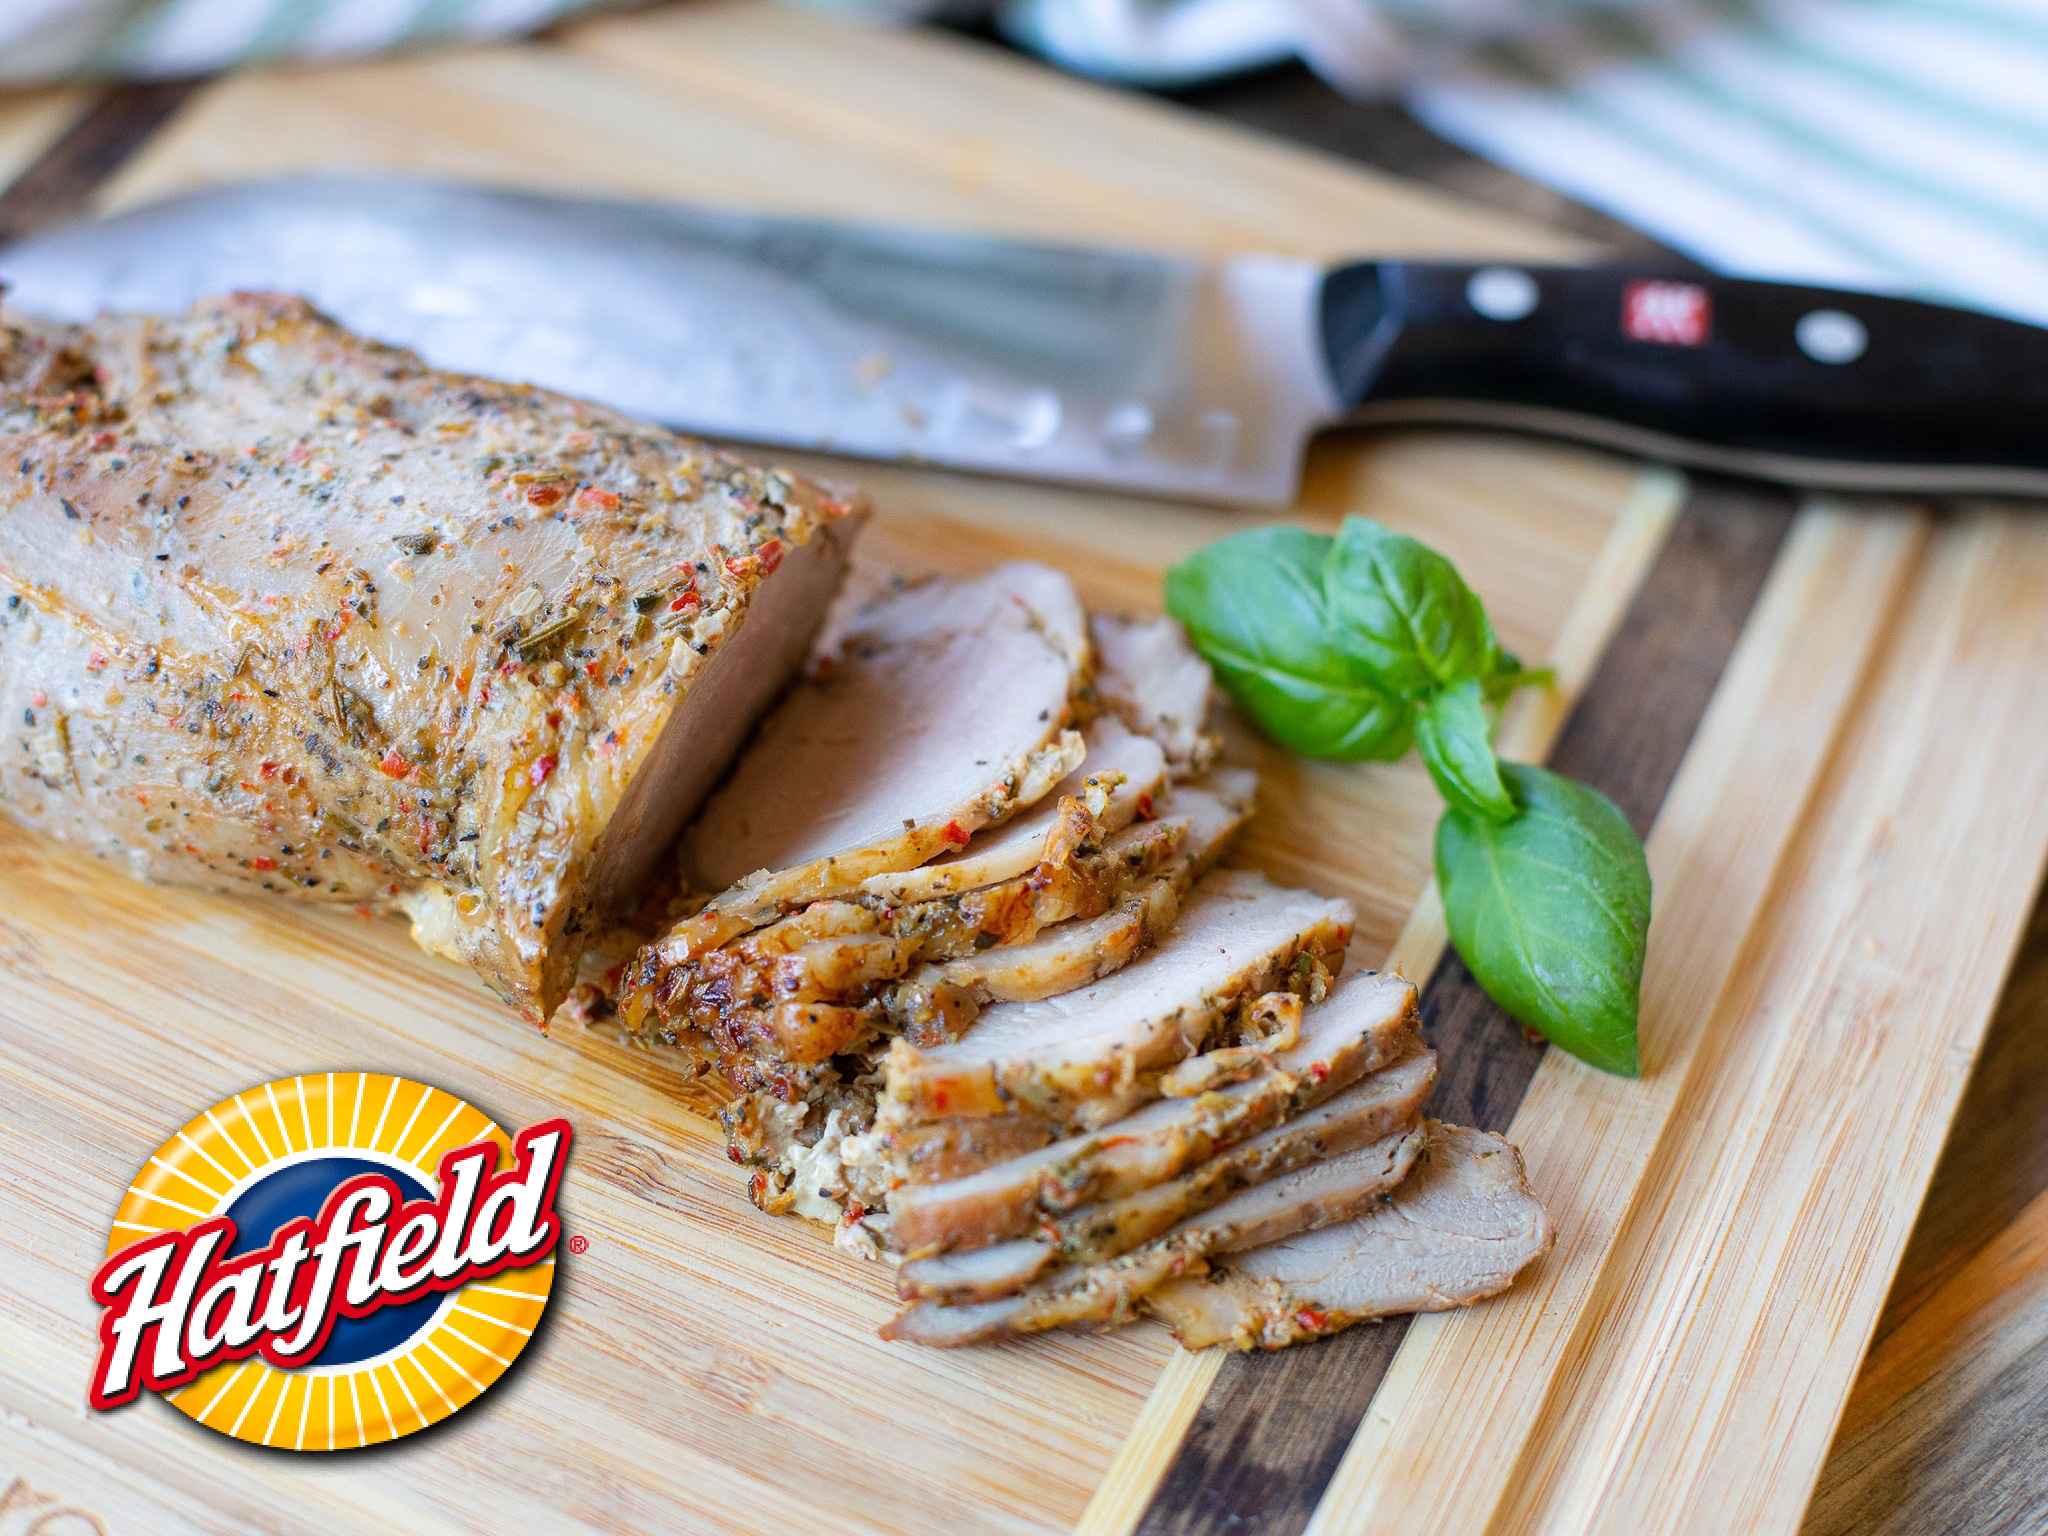 Hatfield Pork Tenderloin And Loin Filet Products Are Perfect For Any Meal – Available At Your Local Publix